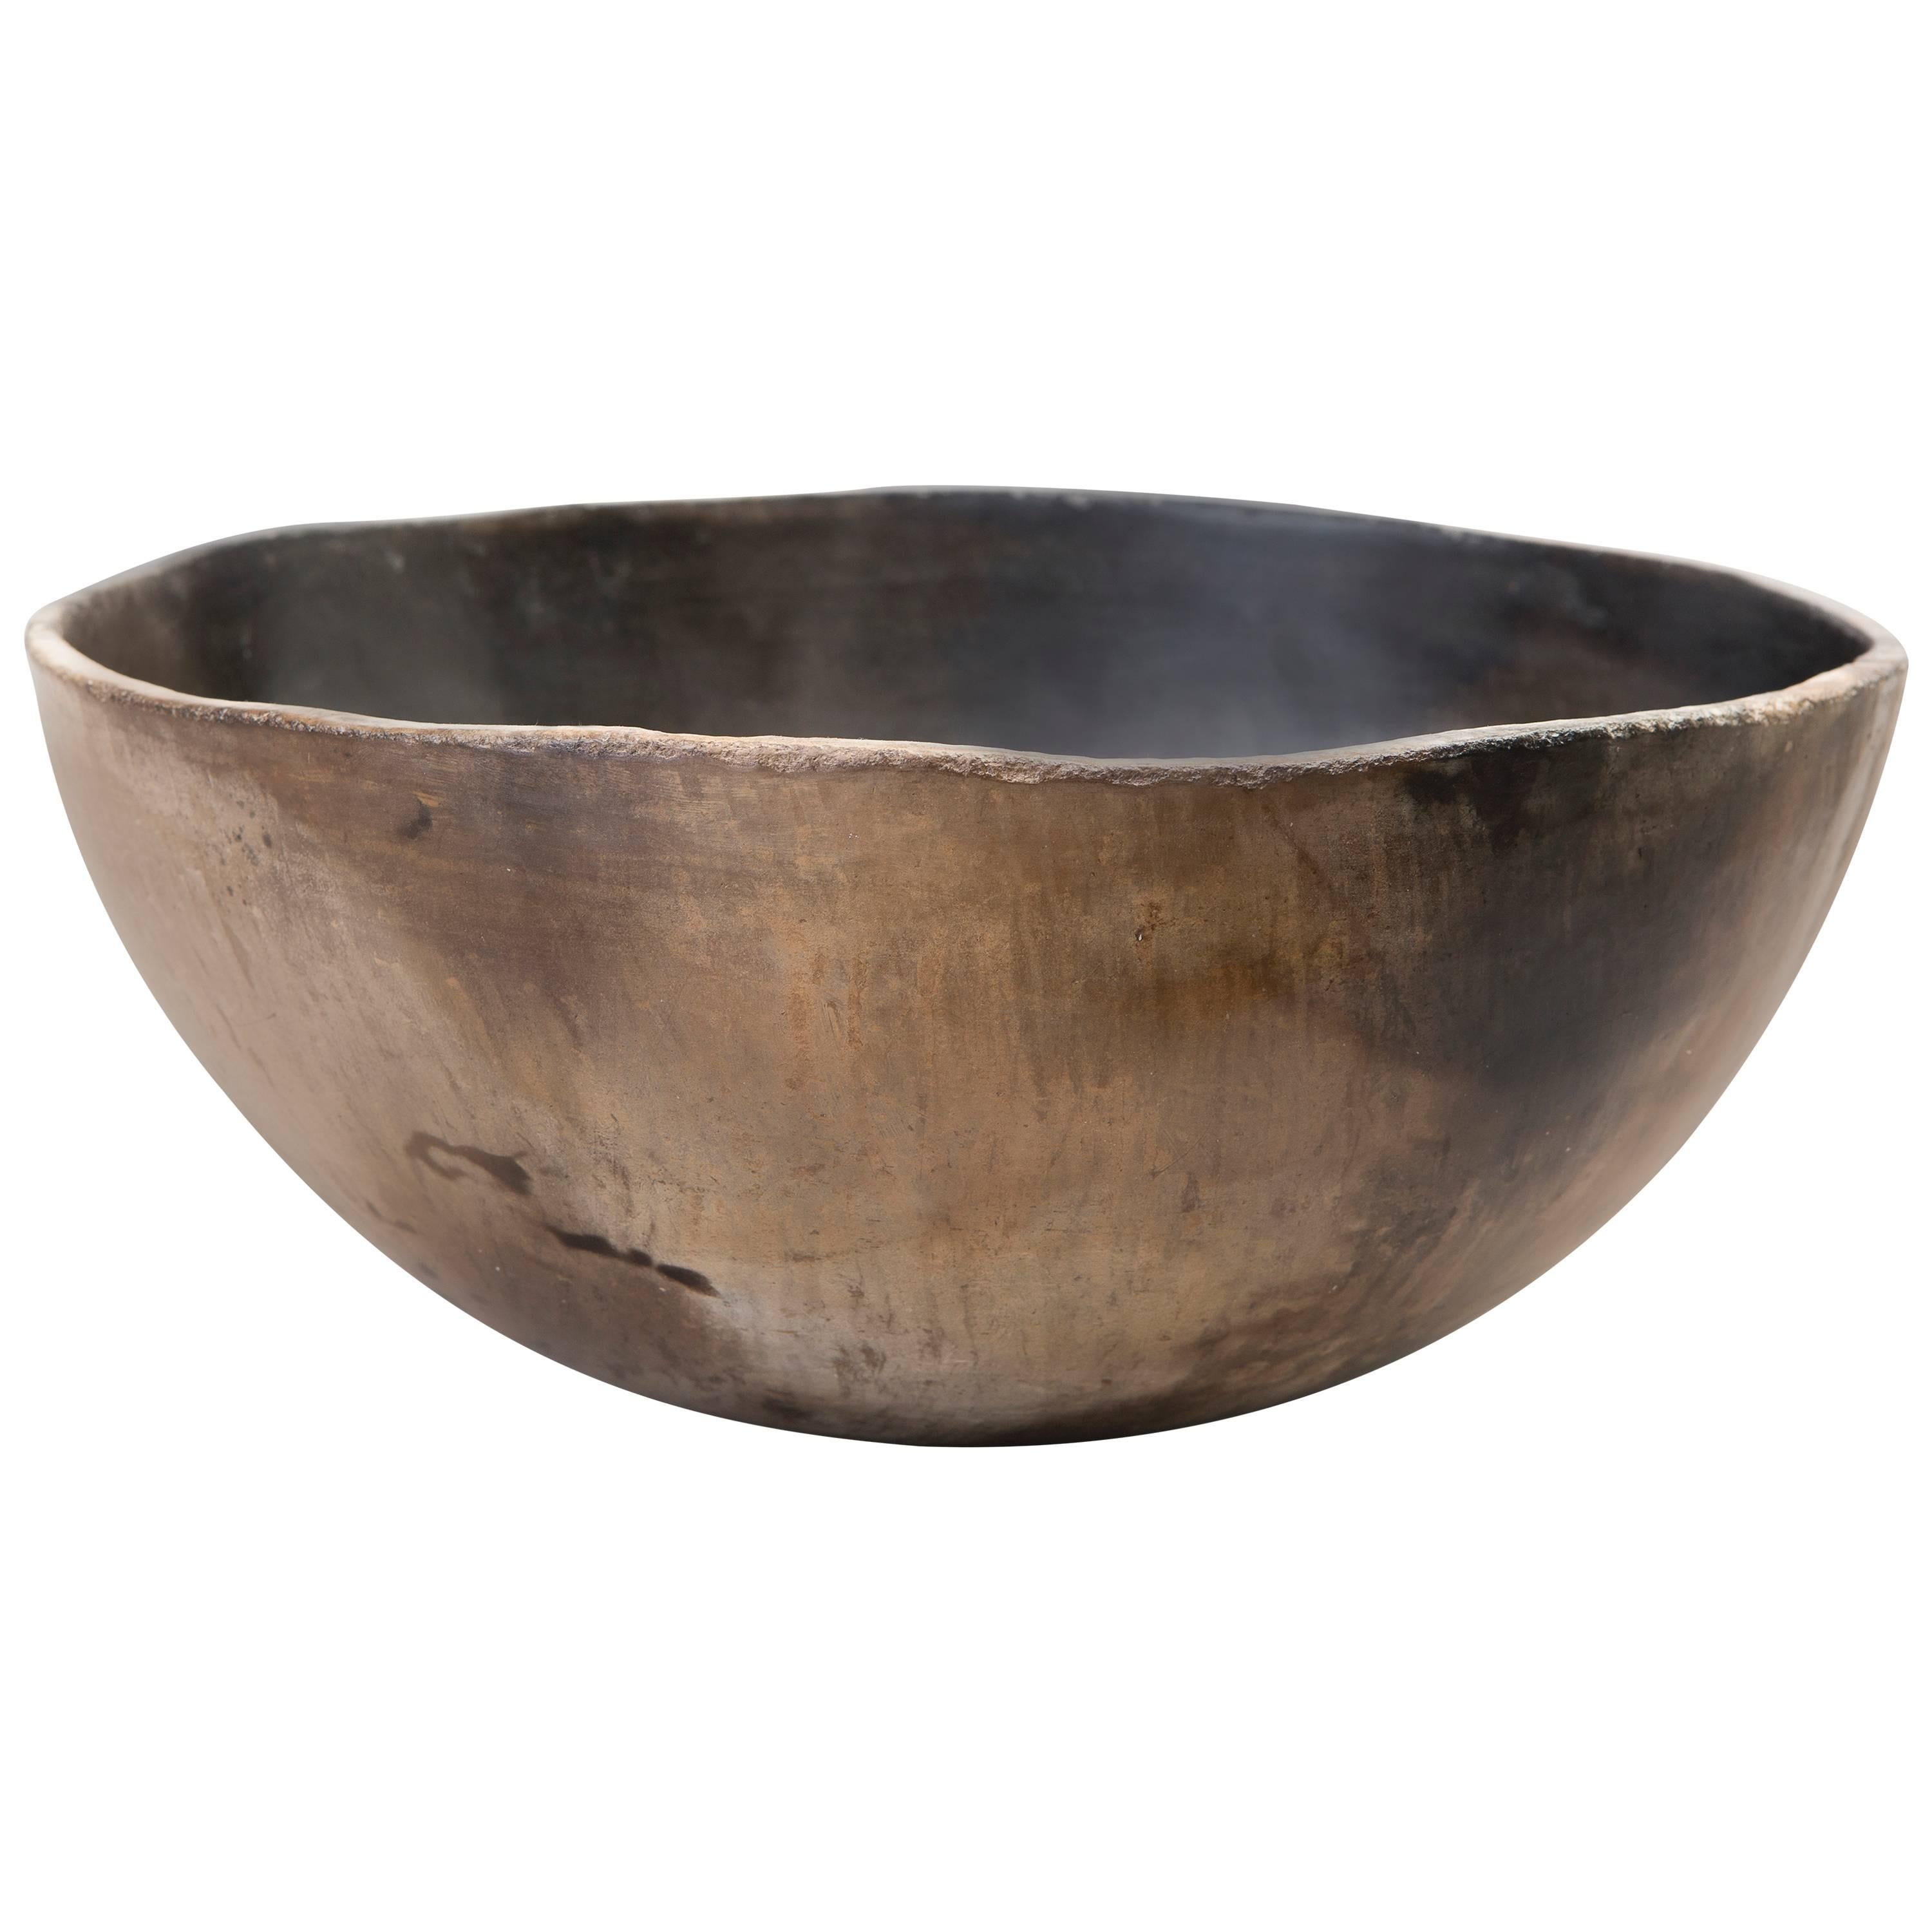 Contemporary 2015 Smoke Fired Bowl, One of a Kind, Karen Swami